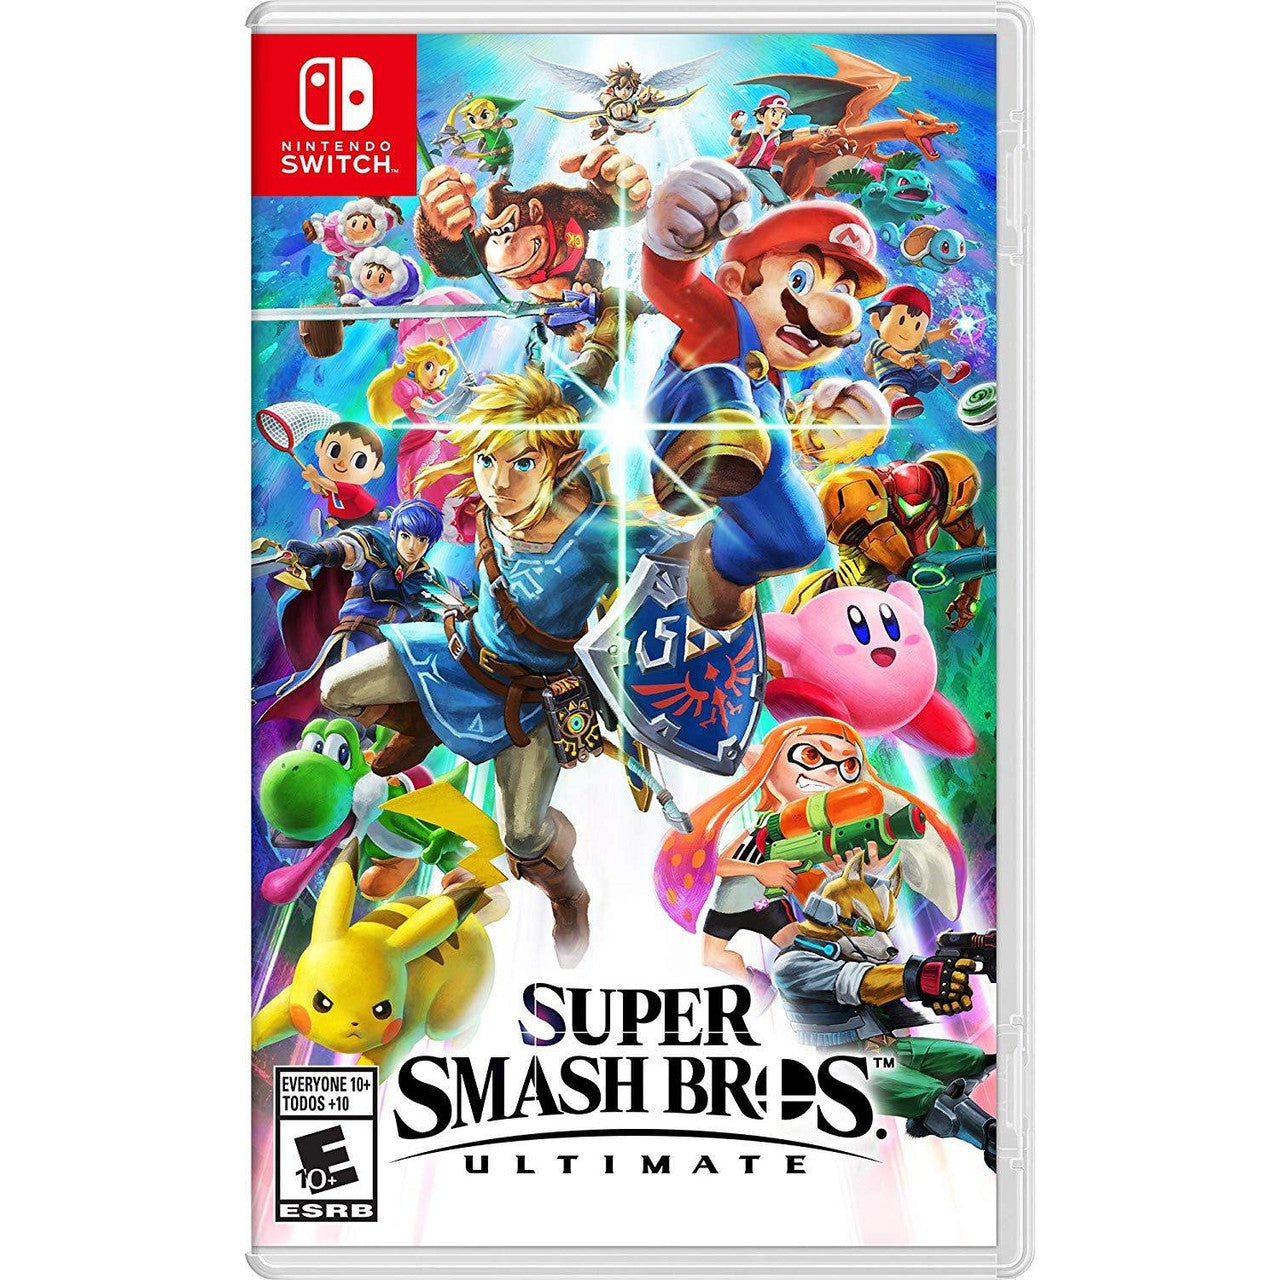 This is brand new.Legendary game worlds and fighters collide in the ultimate showdown—a new entry in the Super Smash Bros. series for the Nintendo Switch™ system! New fighters, like Inkling from the Splatoon™ series and Ridley from the Metroid™ series, make their Super Smash Bros.